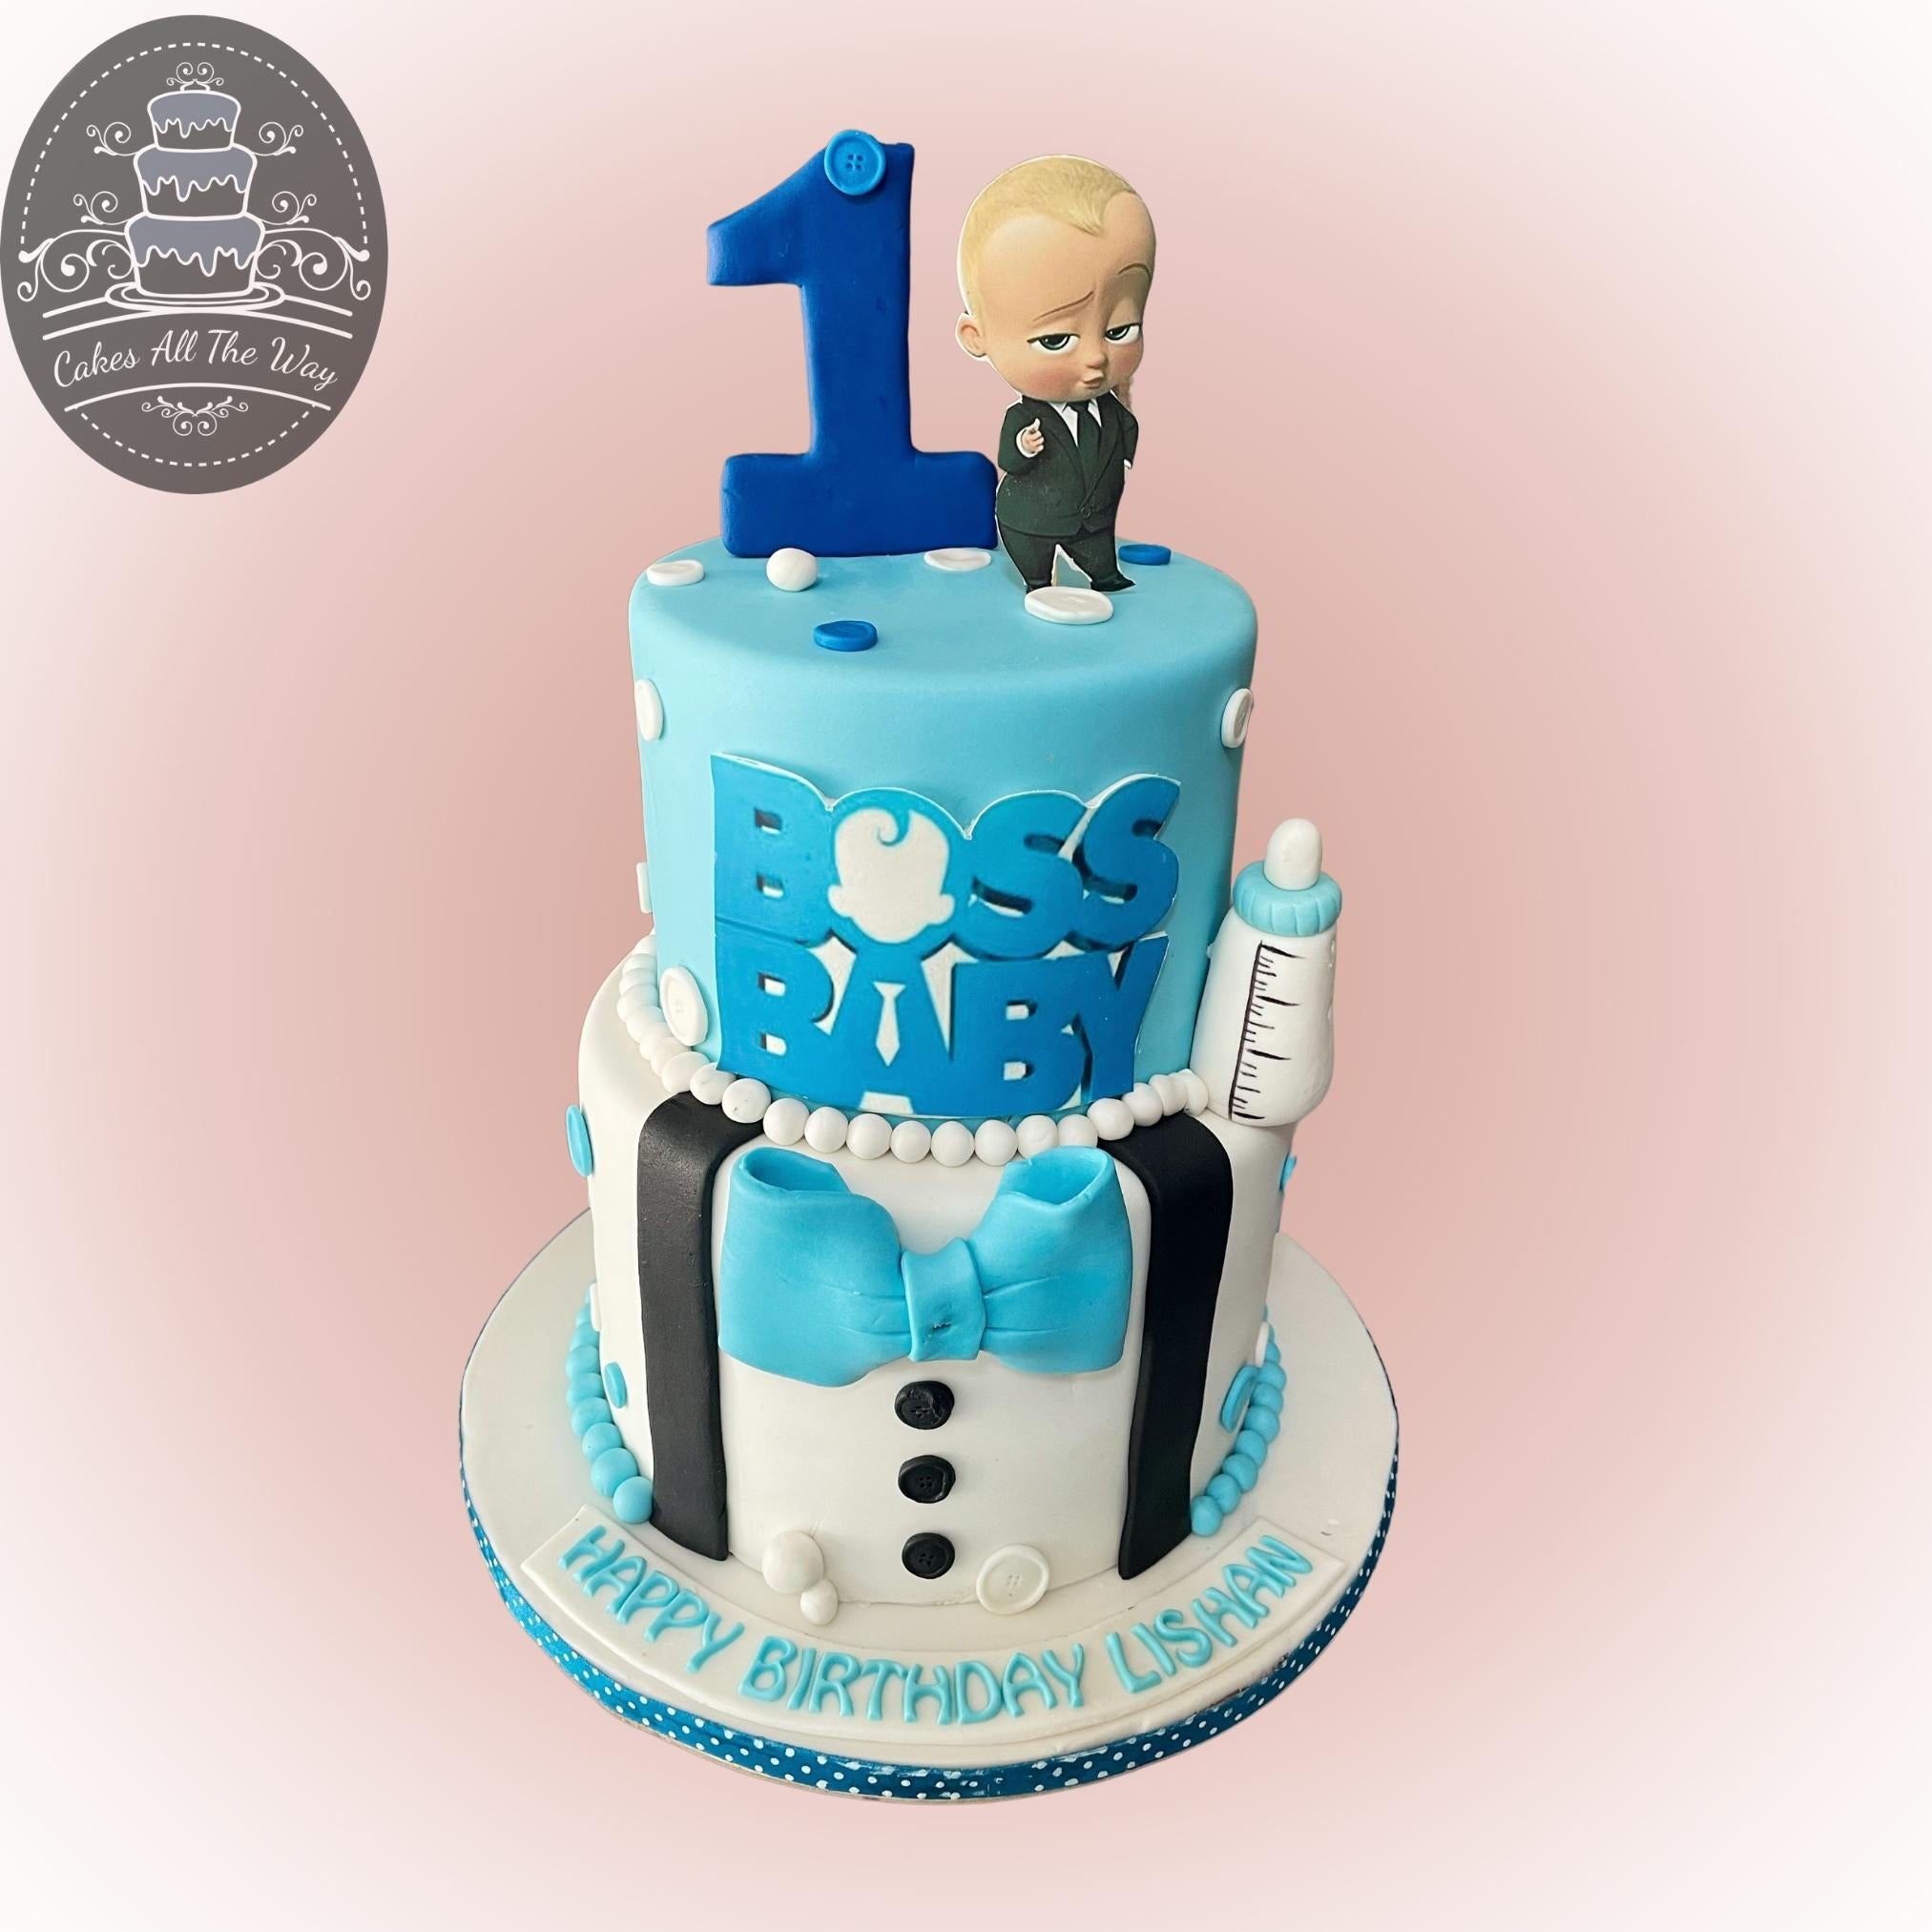 Boss Baby Design Cake By Sugar Daddy's Bakery in Amman | Joi Gifts